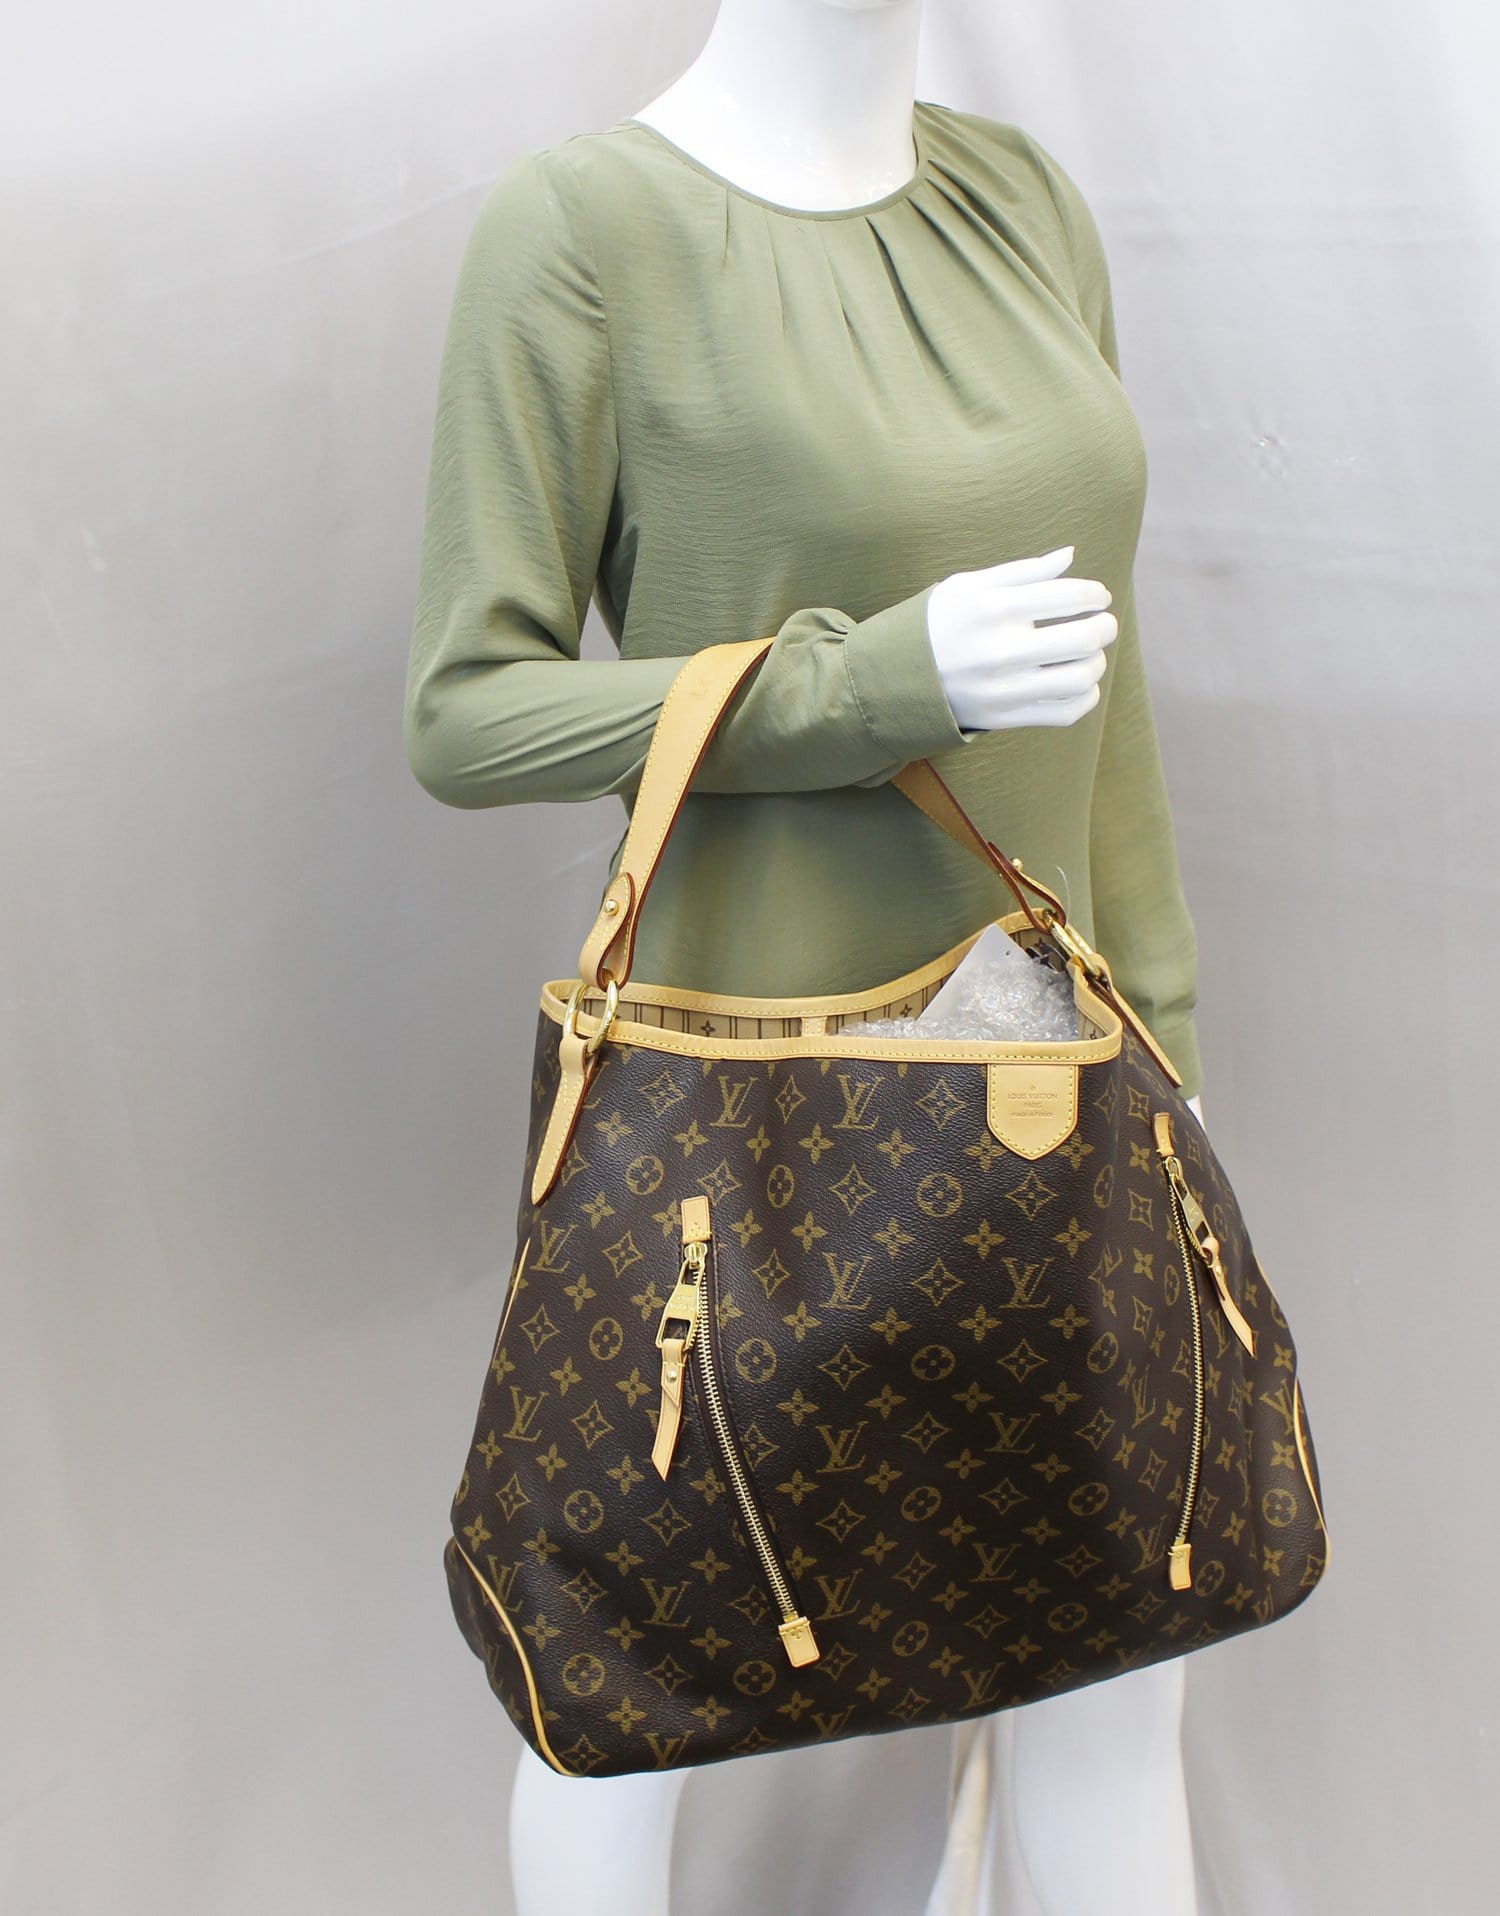 Swap for Louis Vuitton Delightful today at www.swapcouture.net